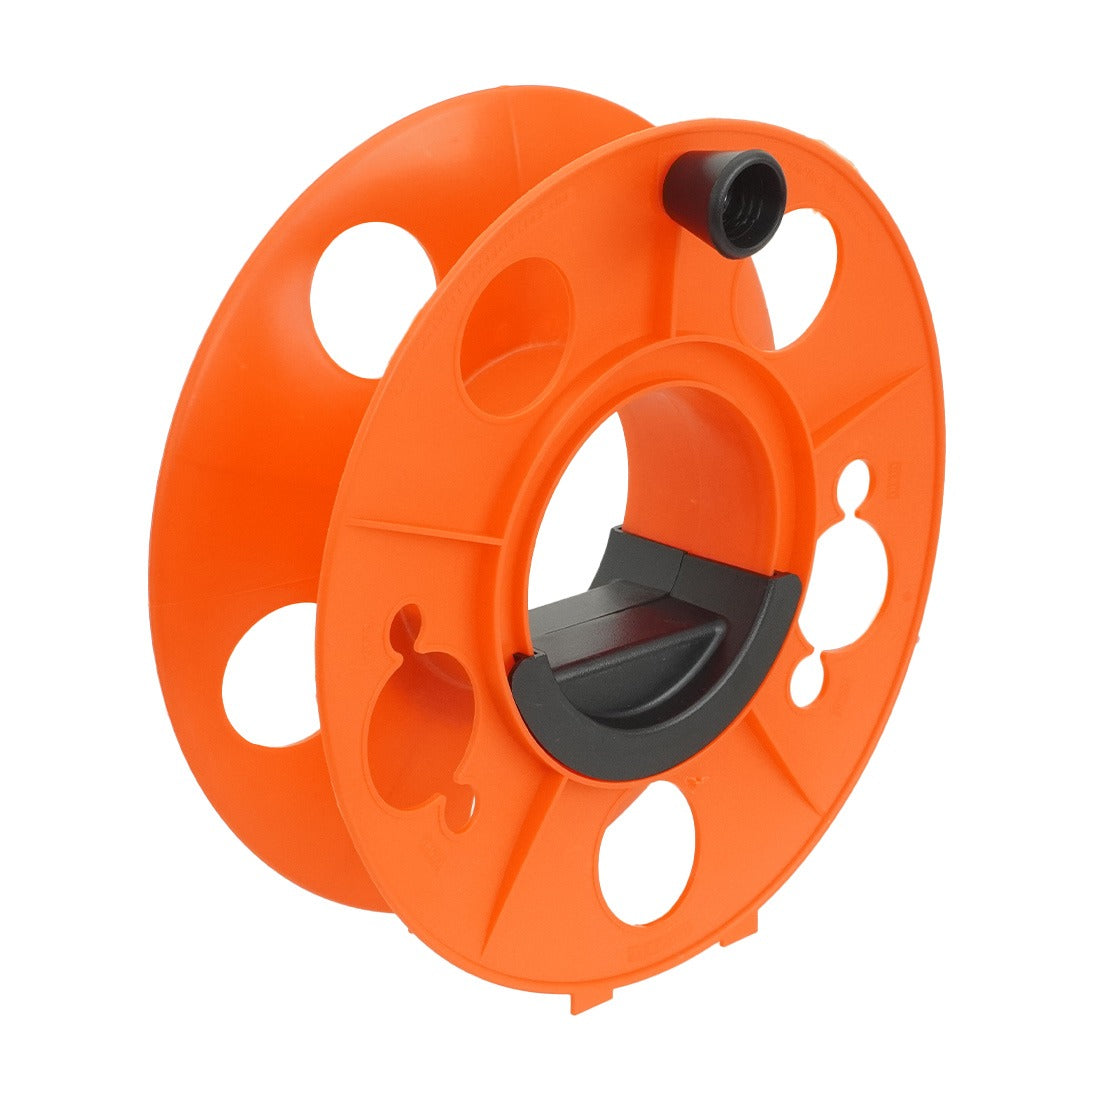 Bayco Hose Storage Reel - 150 Foot Right Angle View